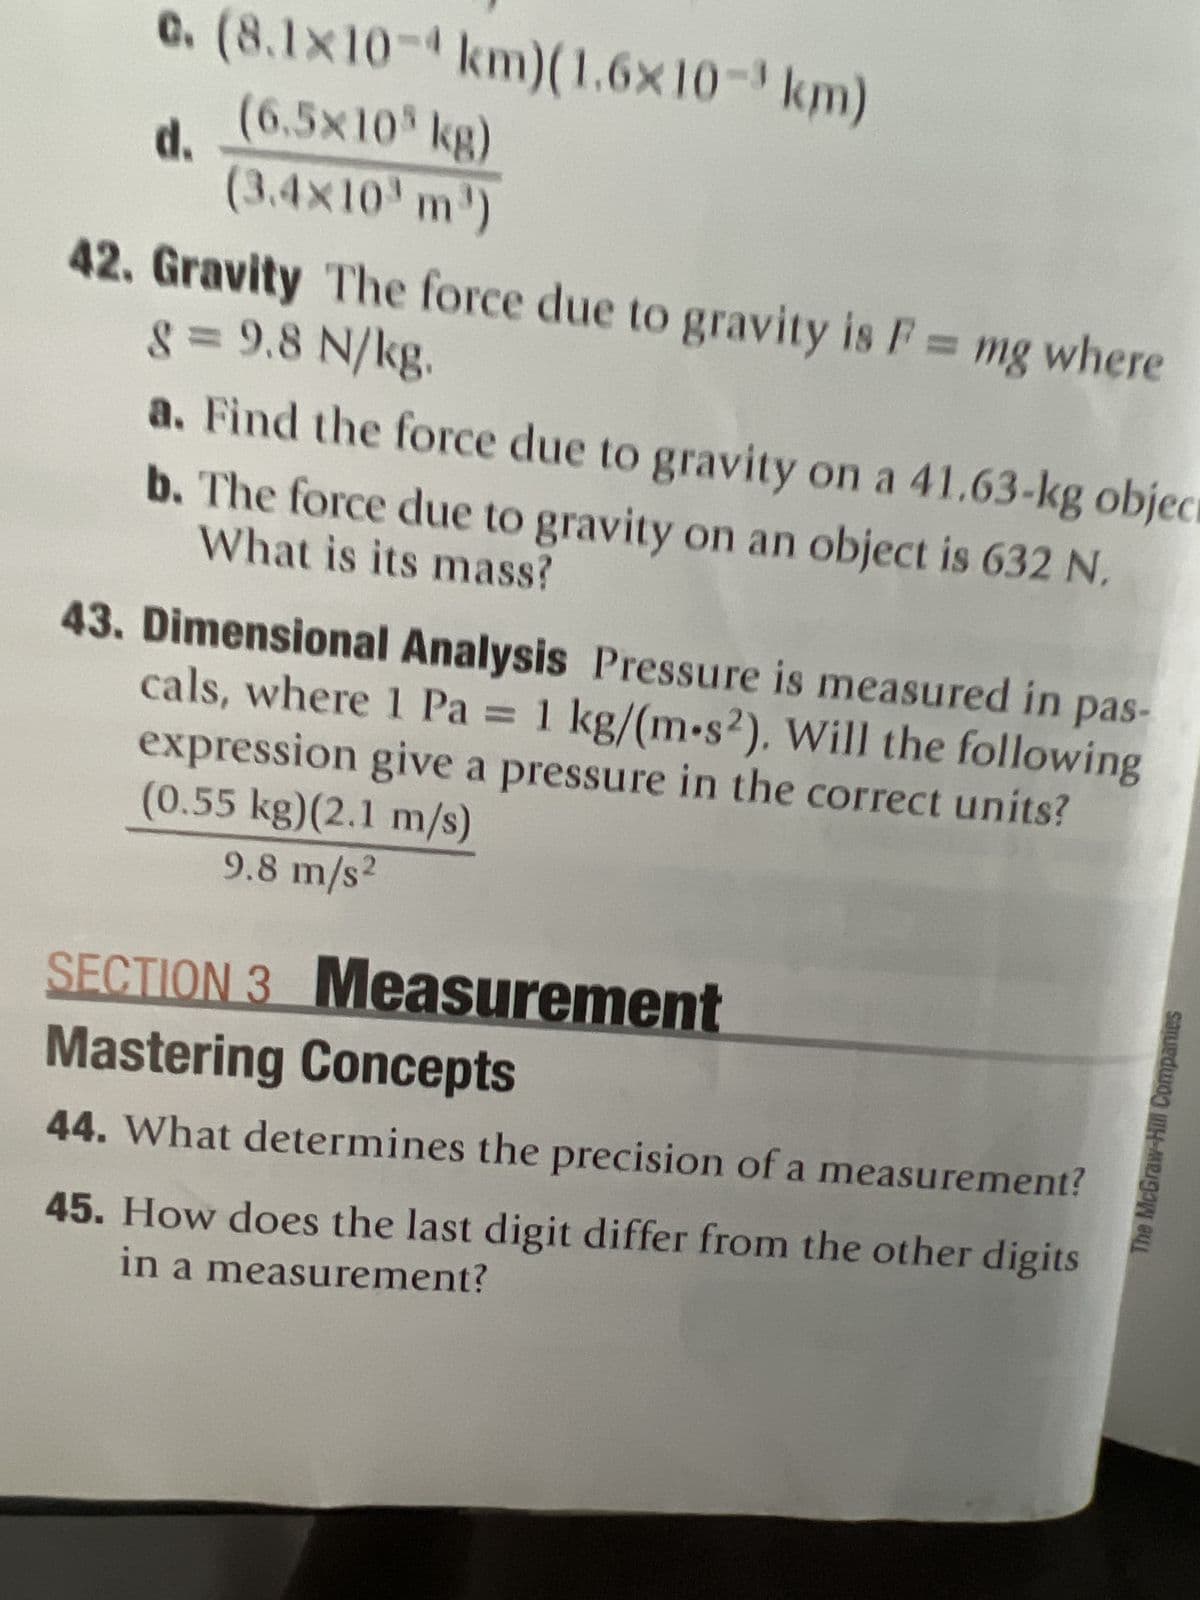 c.
d.
(8.1x10-km)(1.6x10-³ km)
(6.5×10 kg)
(3.4×10³ m³)
8 = 9.8 N/kg.
42. Gravity The force due to gravity is F = mg where
a. Find the force due to gravity on a 41.63-kg object
What is its mass?
b. The force due to gravity on an object is 632 N.
units?
43. Dimensional Analysis Pressure is measured in pas-
cals, where 1 Pa = 1 kg/(m-s2). Will the following
(0.55 kg)(2.1 m/s)
expression give a pressure in the correct
9.8 m/s2
SECTION 3 Measurement
Mastering Concepts
44. What determines the precision of a
measurement?
45. How does the last digit differ from the other digits
in a measurement?
The McGraw-Hill Companies